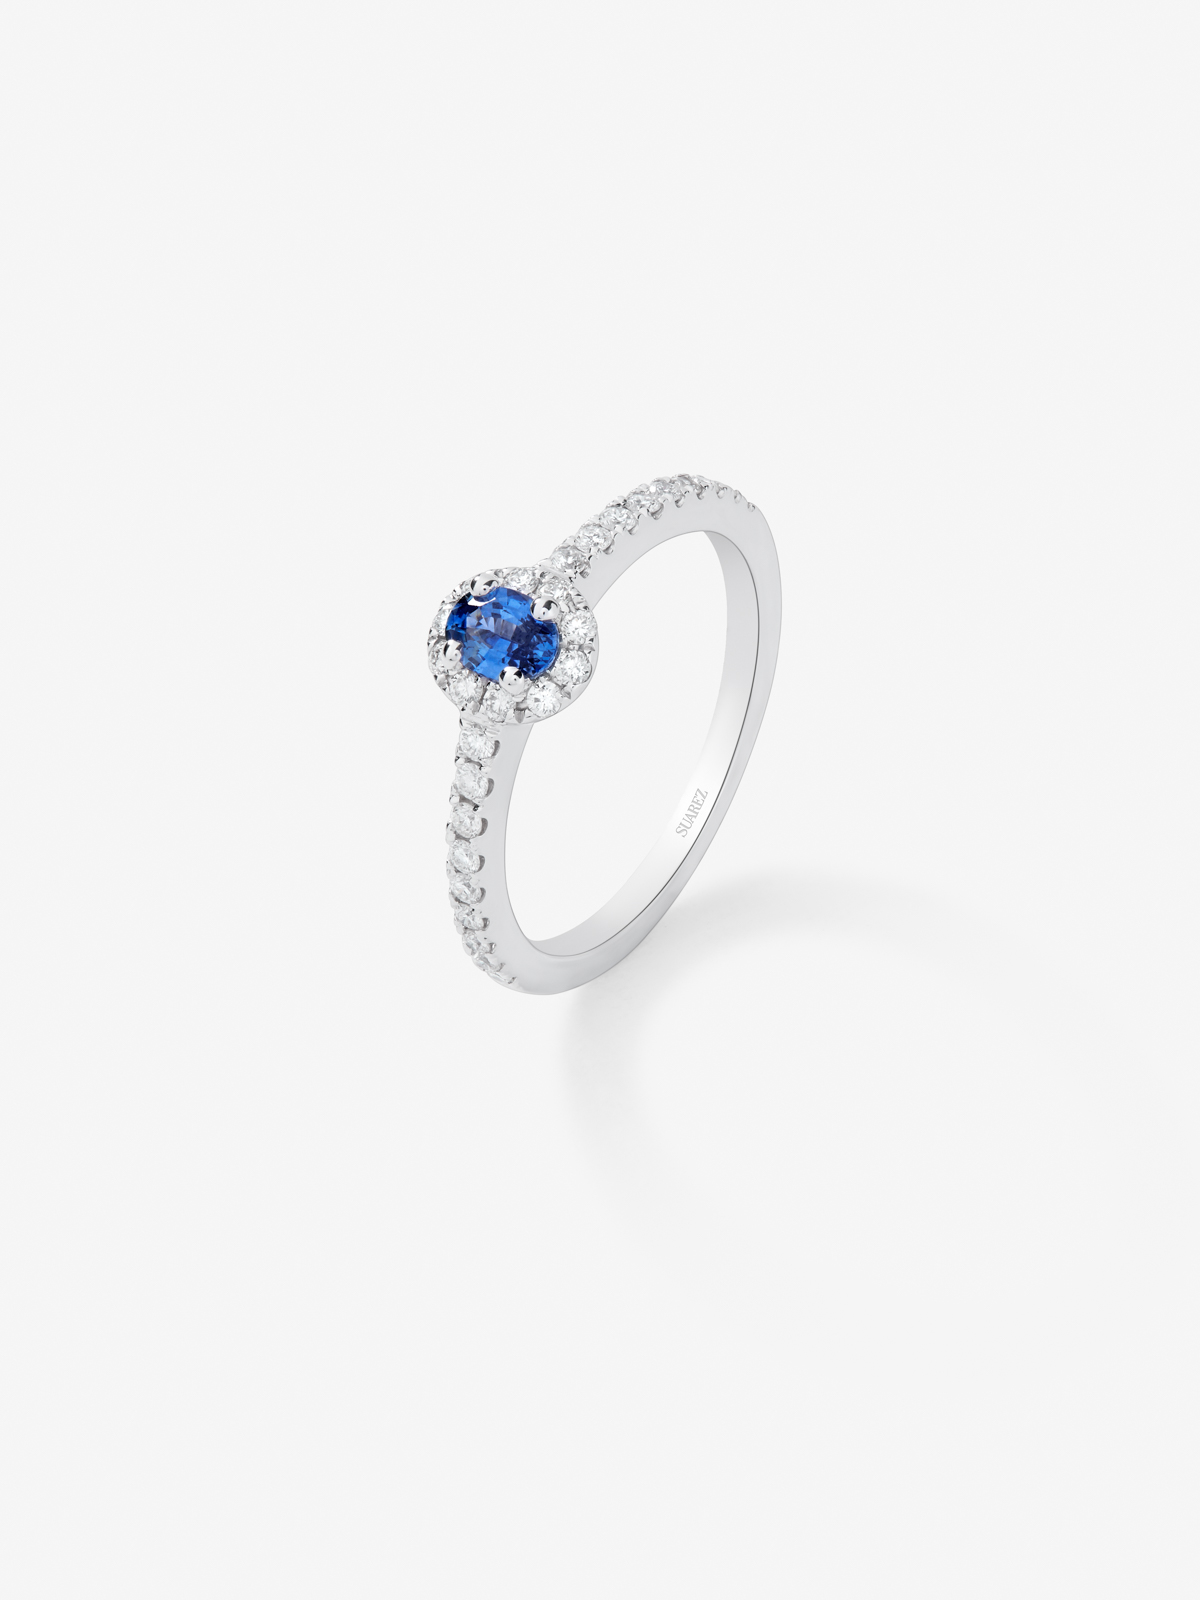 18K White Gold Ring with Azul Blue Sapp